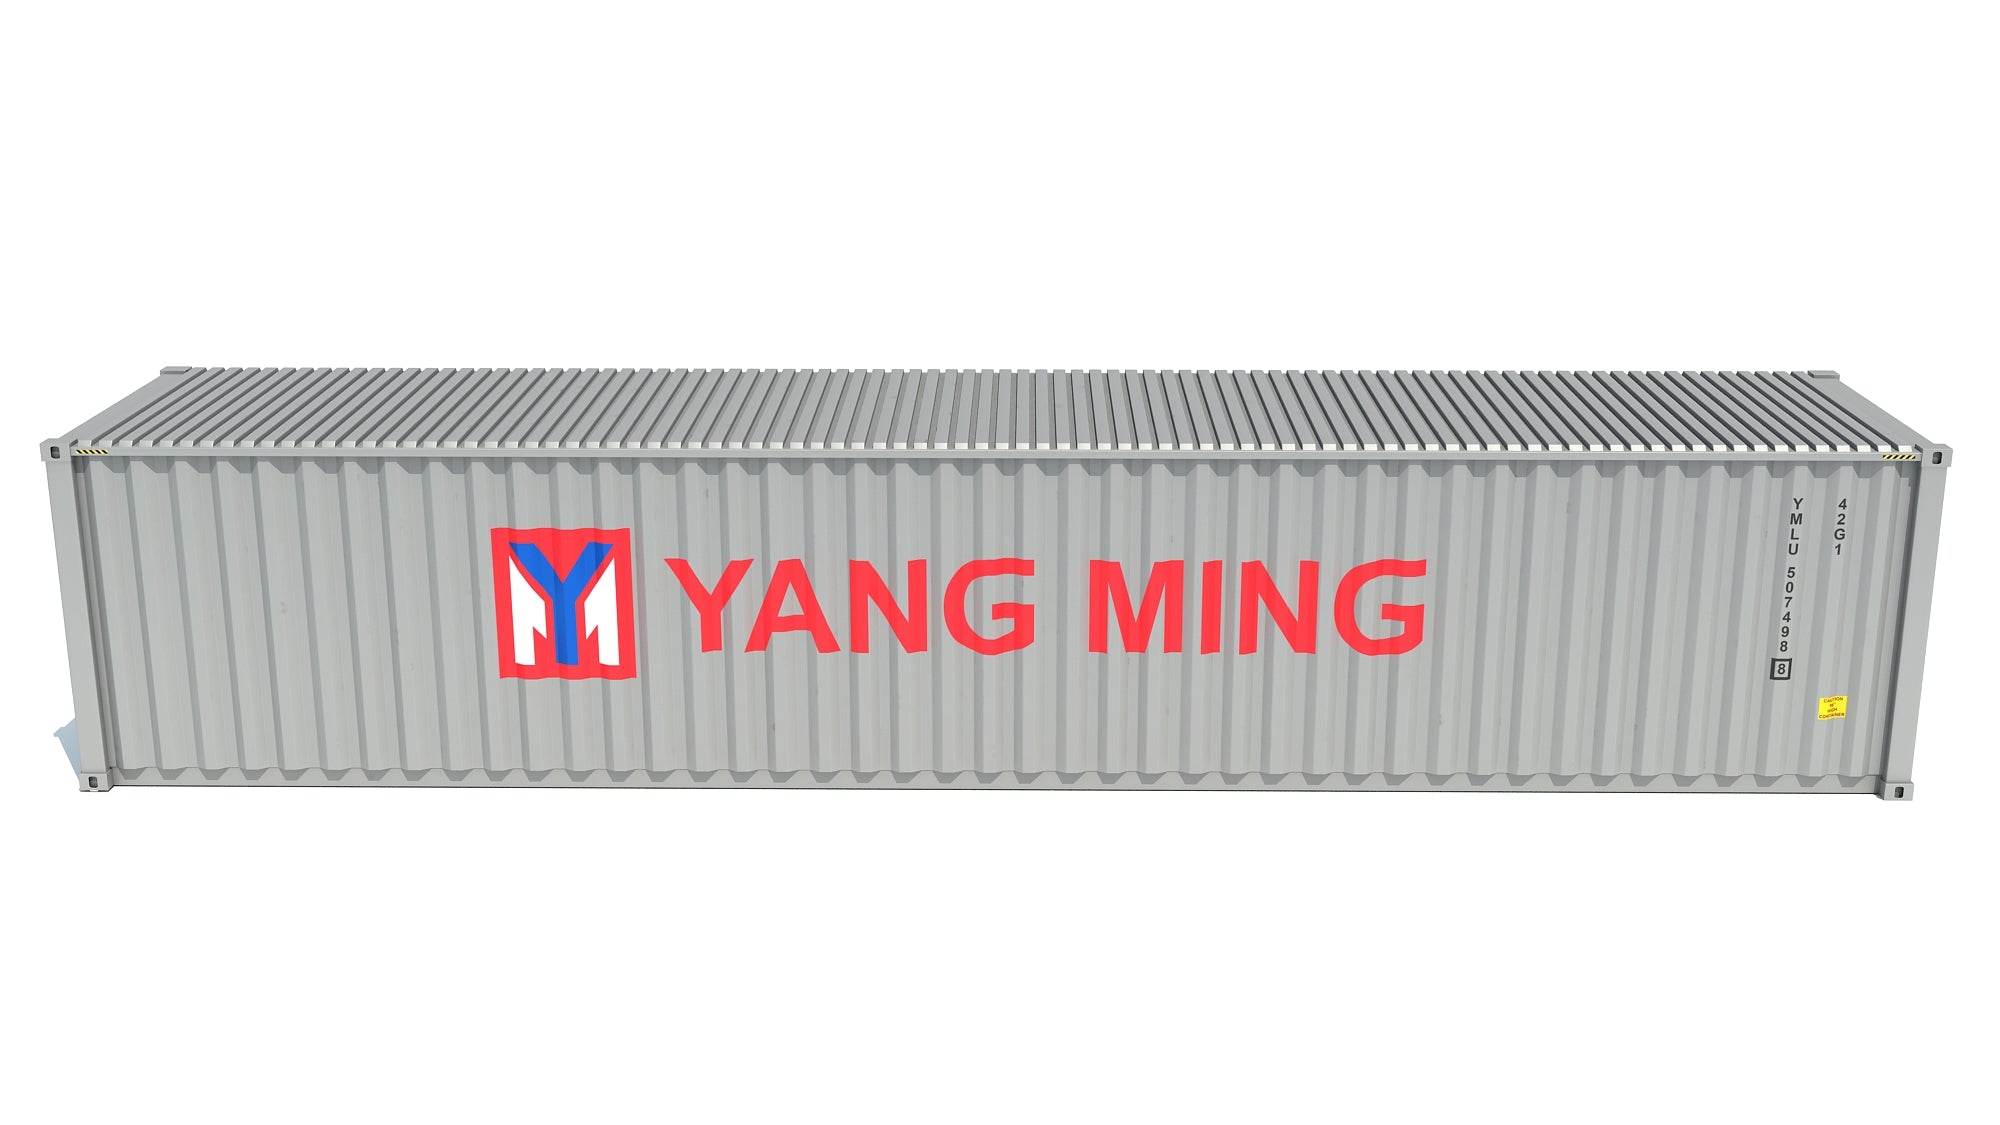 Shipping Container Yang Ming